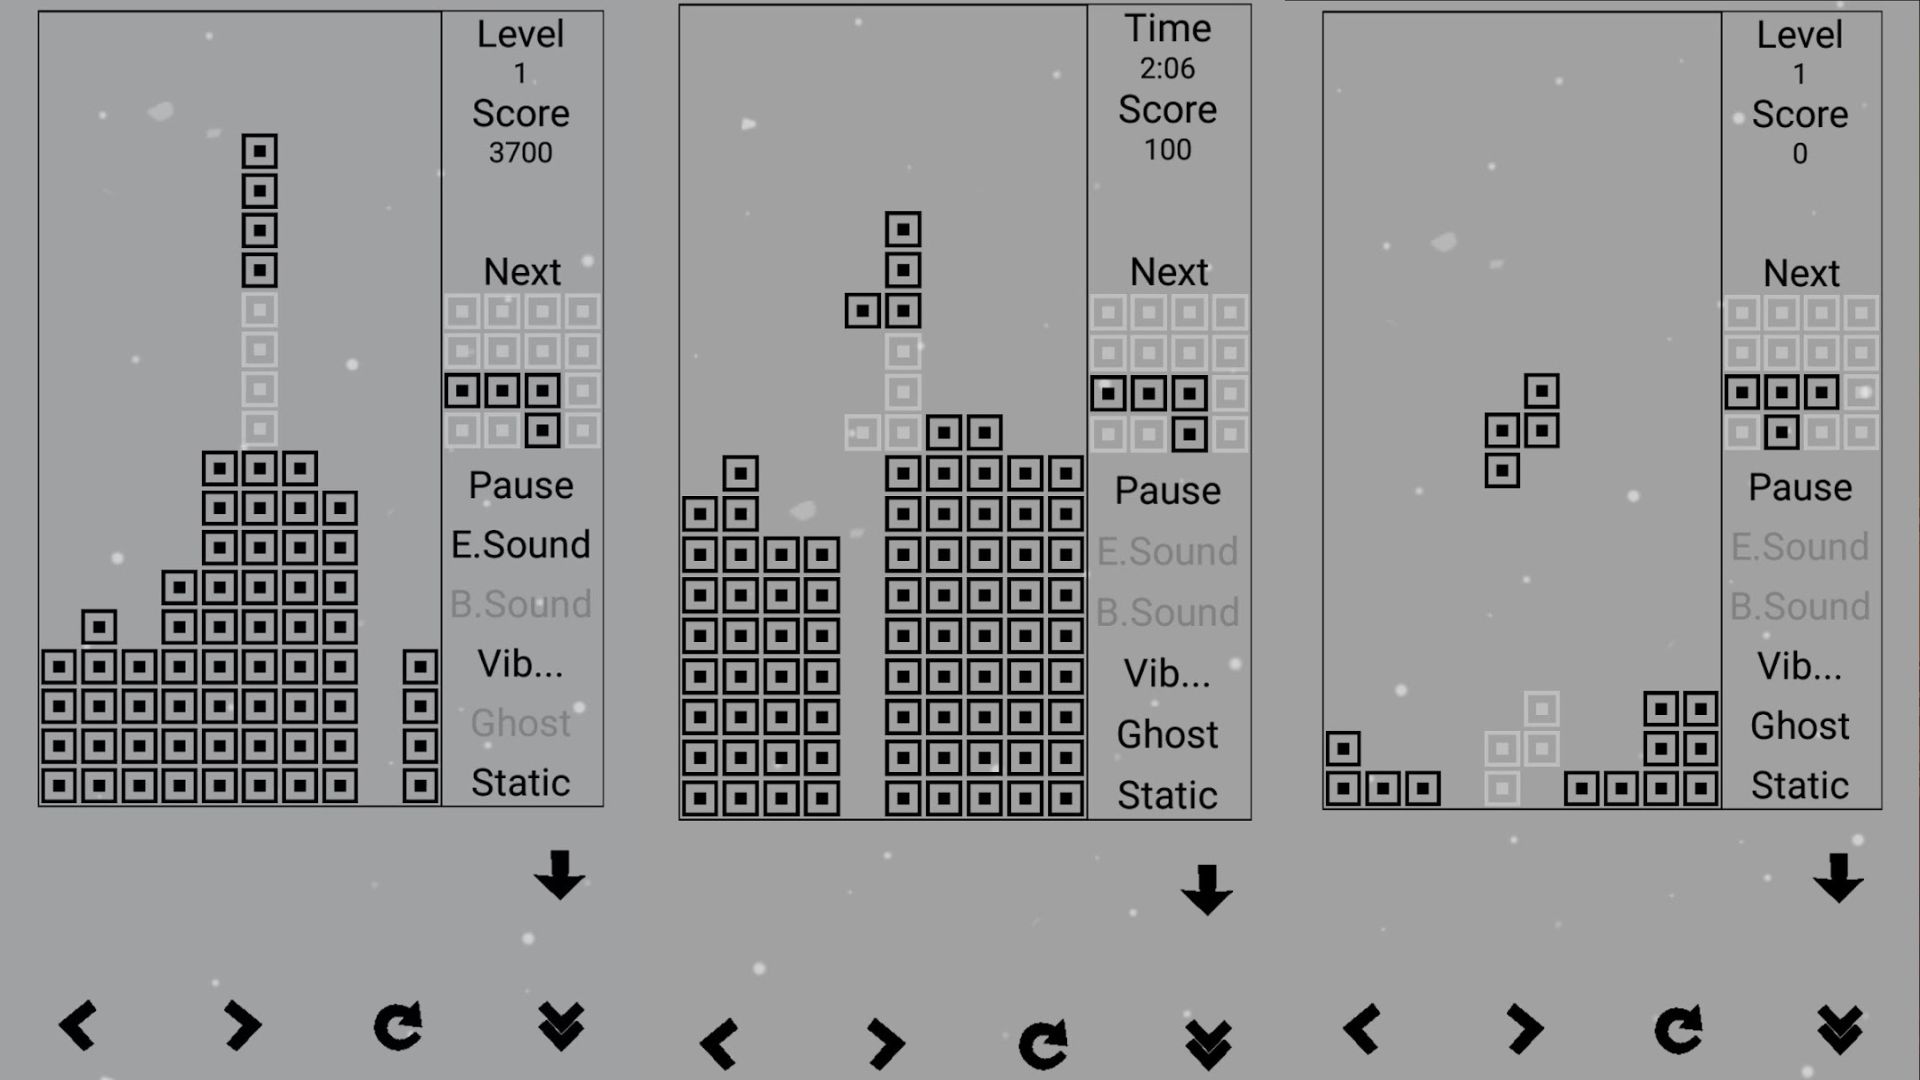 One of the many Tetris games, Classic Blocks, a simple, greyscale Tetris. There are three screens mid-game, with blocks falling into the grid, various scores and menu options, and touch controls at the bottom.